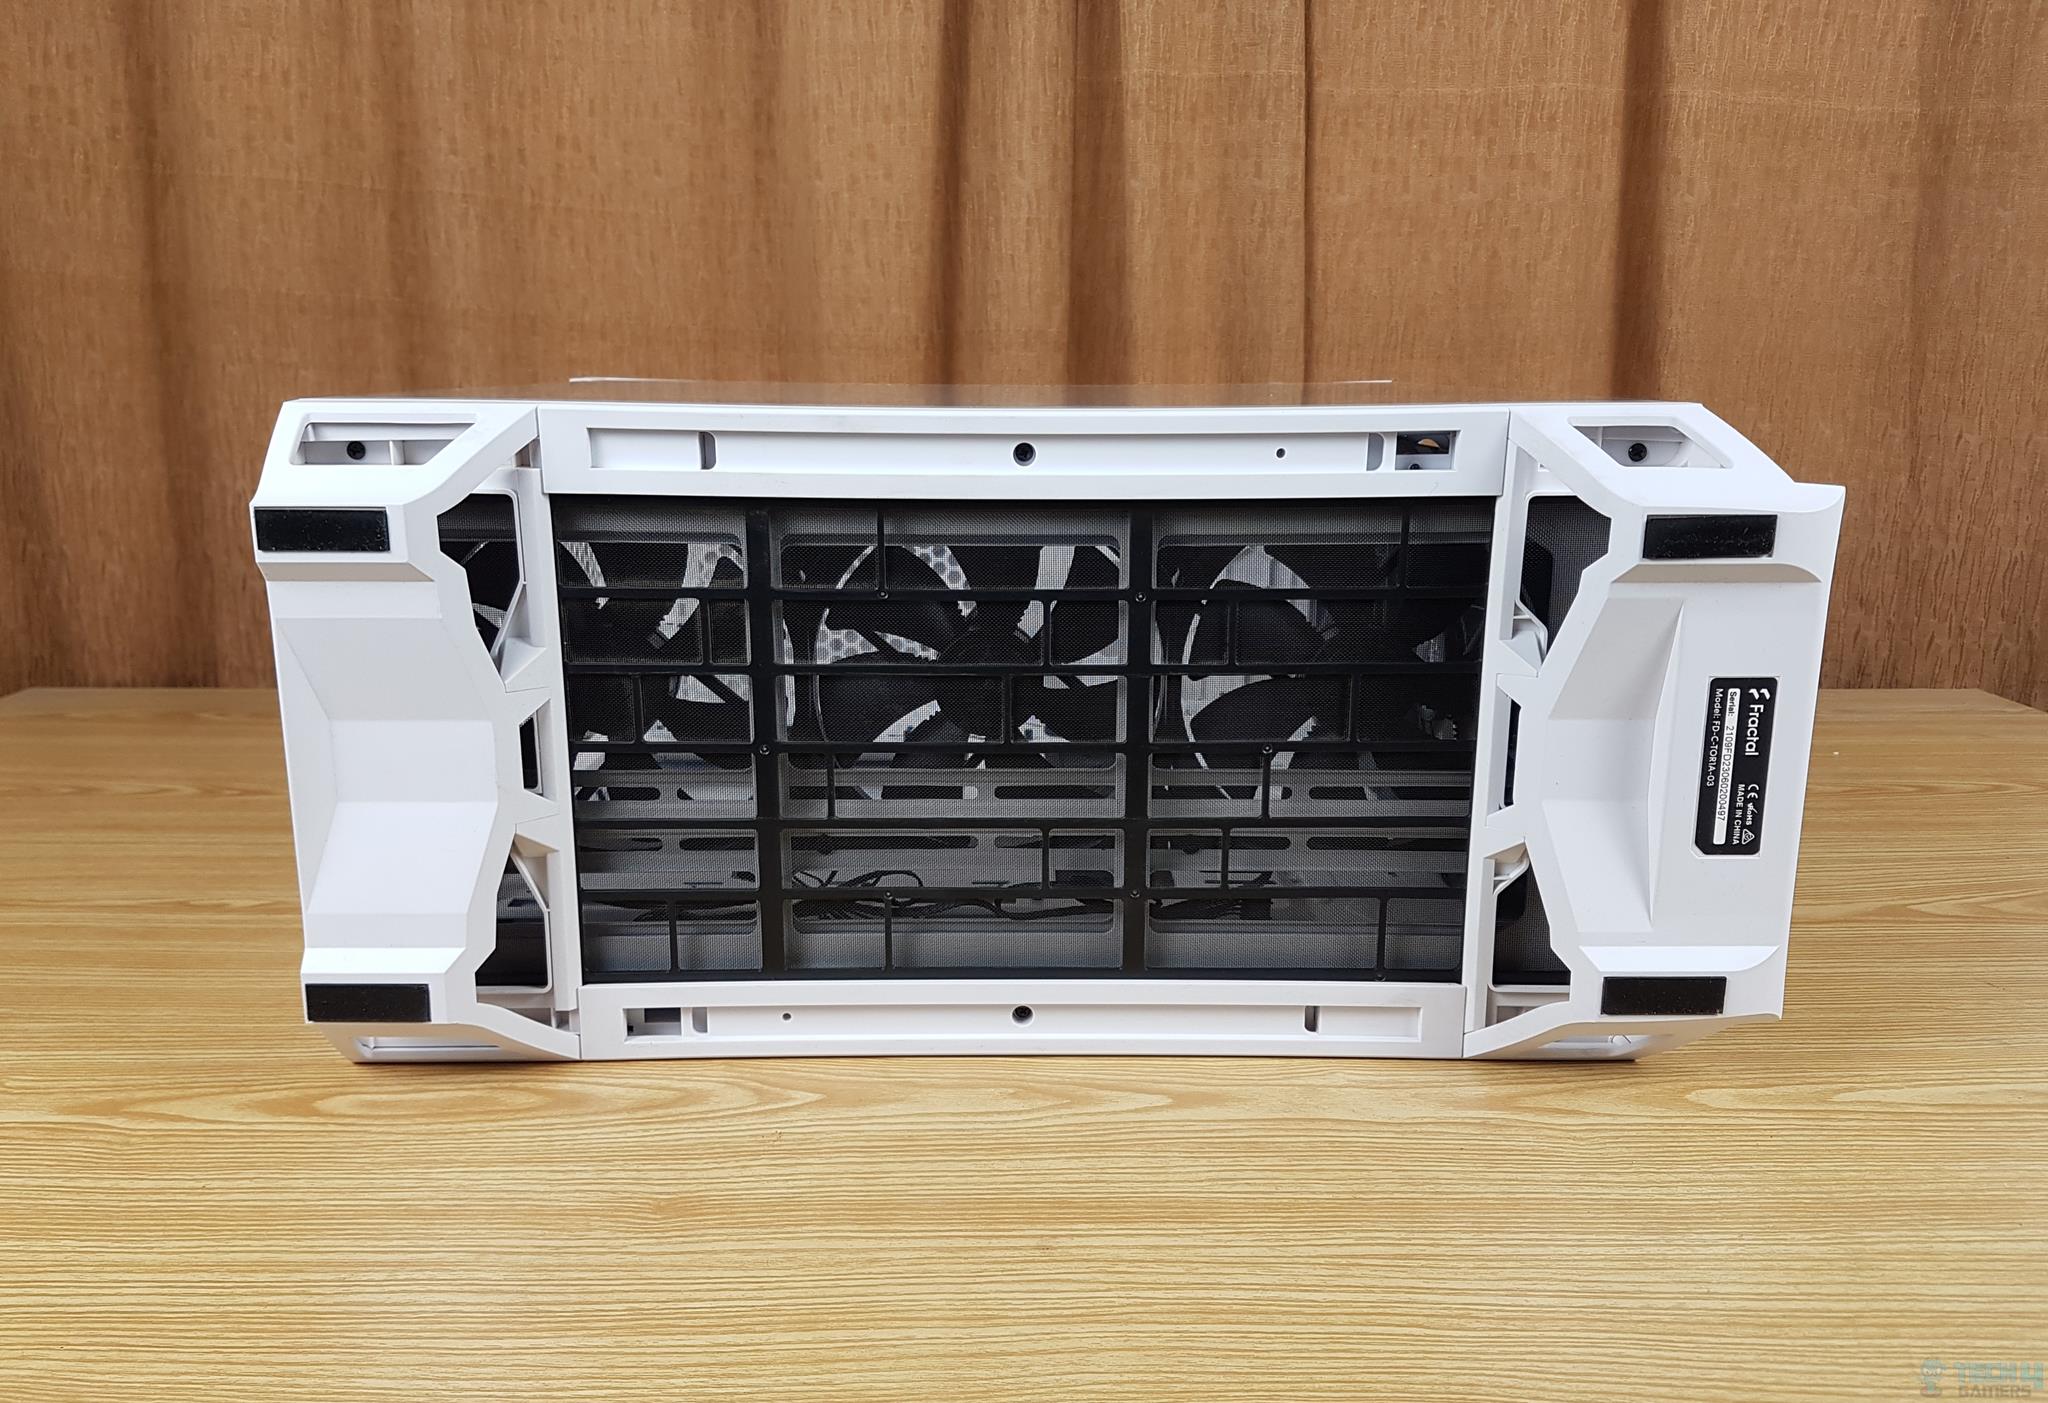 Fractal Design Torrent White TG Clear Tint PC Case — The feet of the case